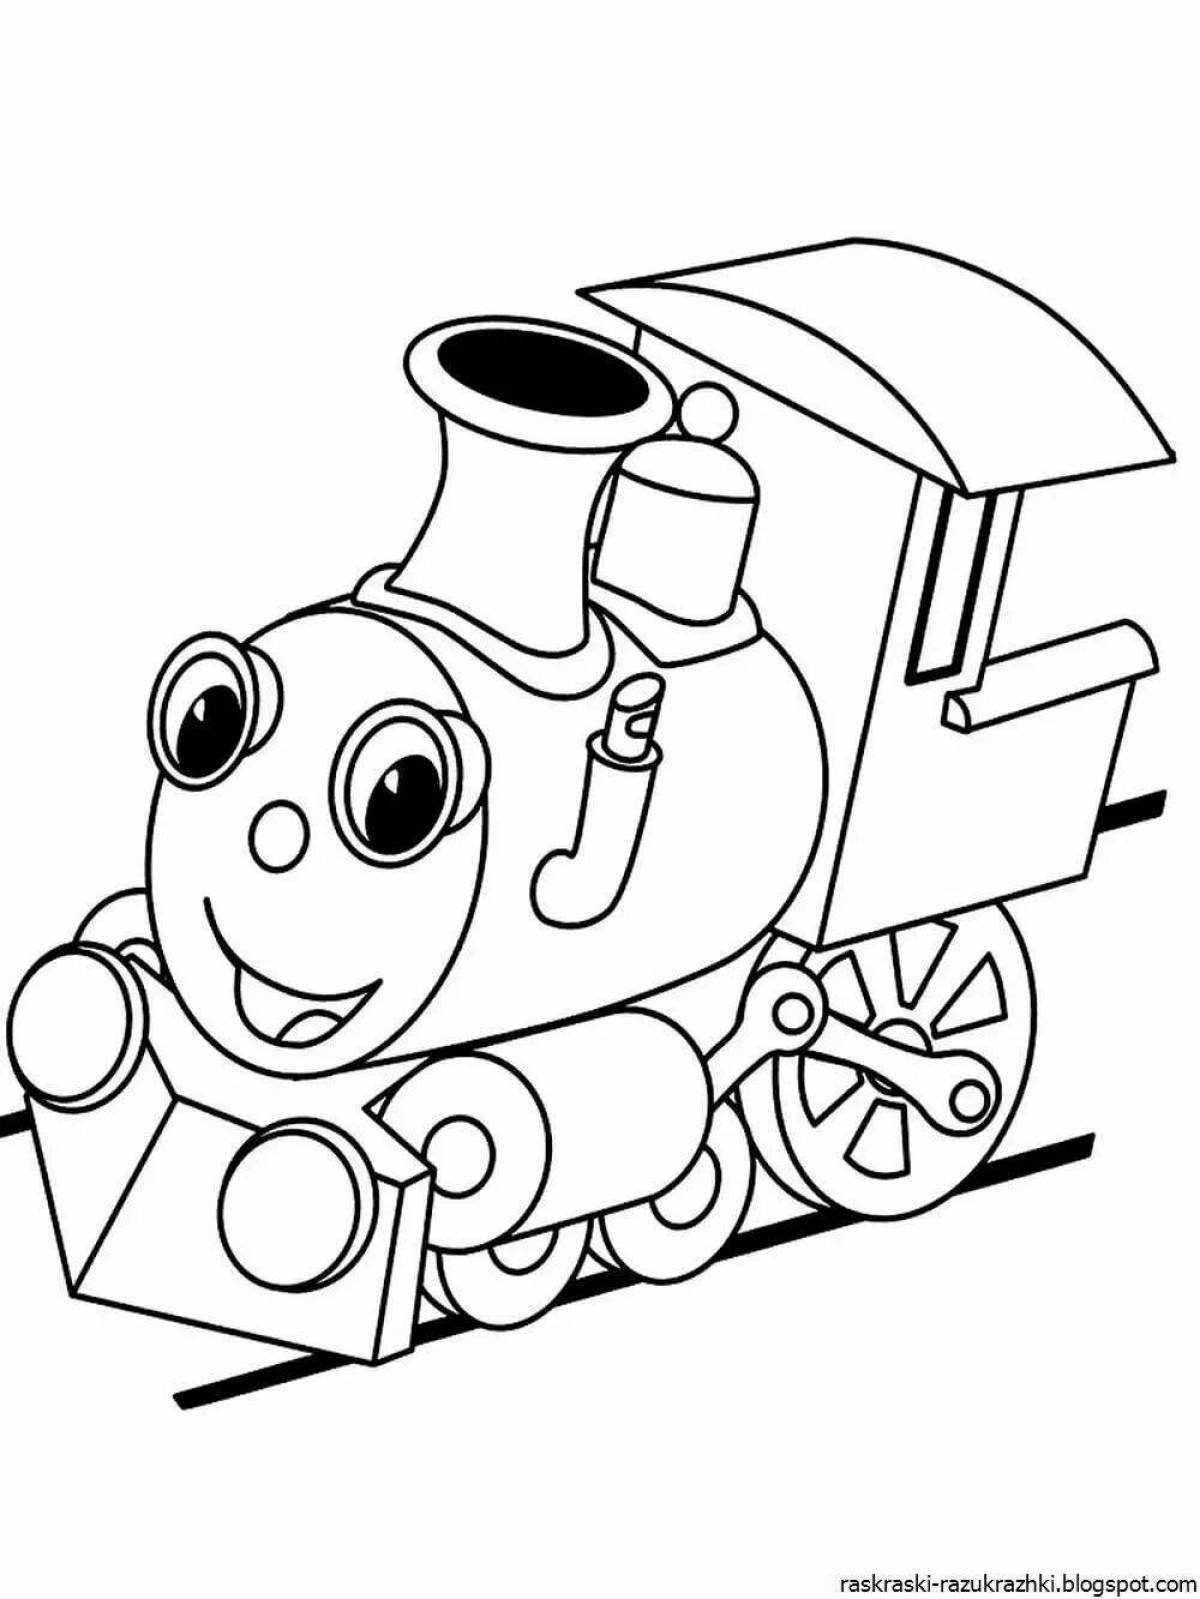 Creative train coloring book for kids